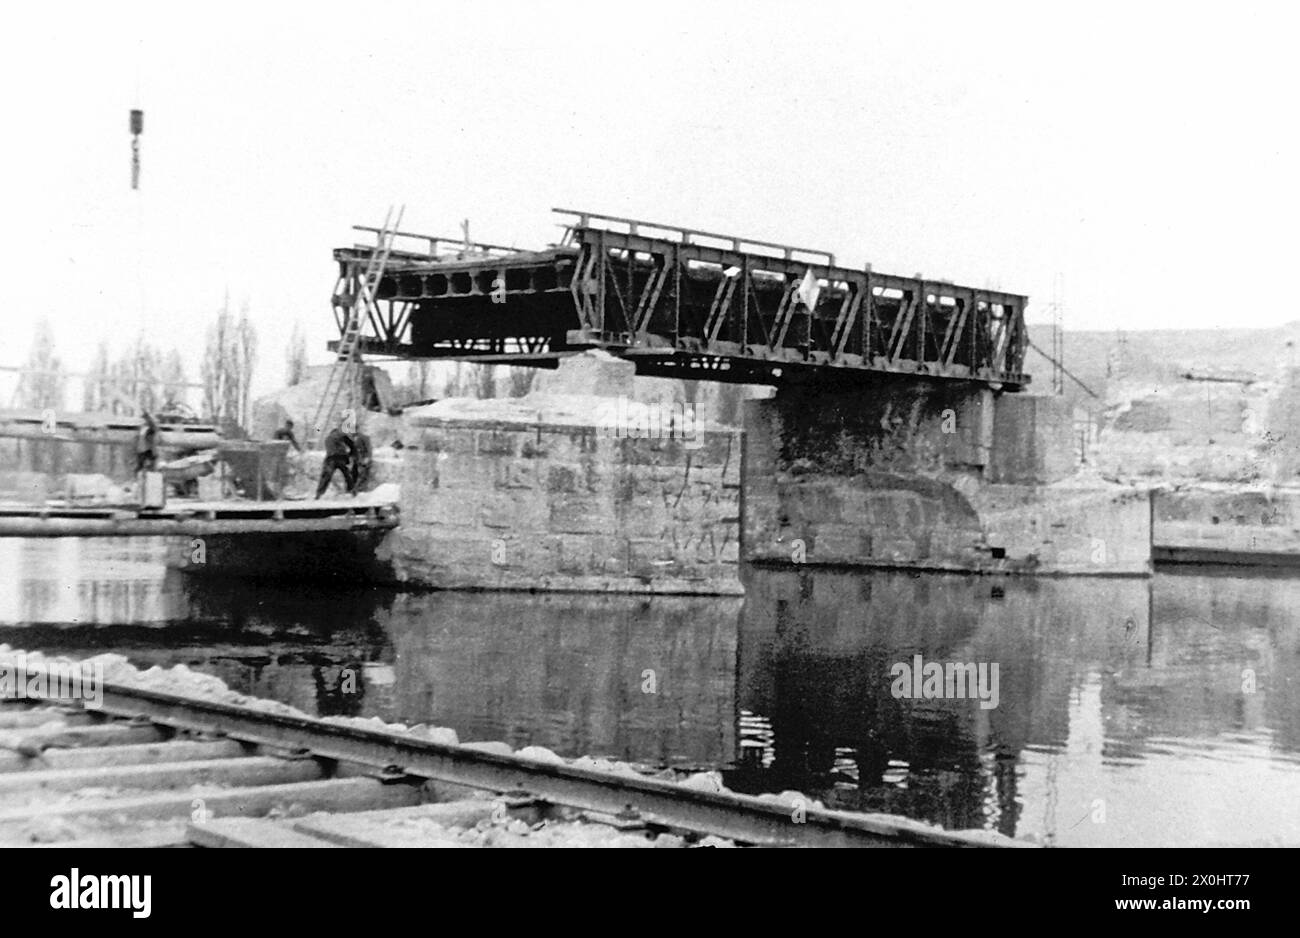 On April 1, 1945, German units blew up arch six in the middle of the bridge. In the following years, a temporary wooden construction spanned the gap in the structure. The opening of the New Main Bridge in 1954 was followed by the reconstruction of the Old Main Bridge, which was completed in 1957. Due to the expansion of the Main into a major shipping route, the three middle arches five to seven were replaced by a prestressed concrete beam around 58 meters long, which spanned the Main dammed by the Goßmannsdorf barrage. [automated translation] Stock Photo